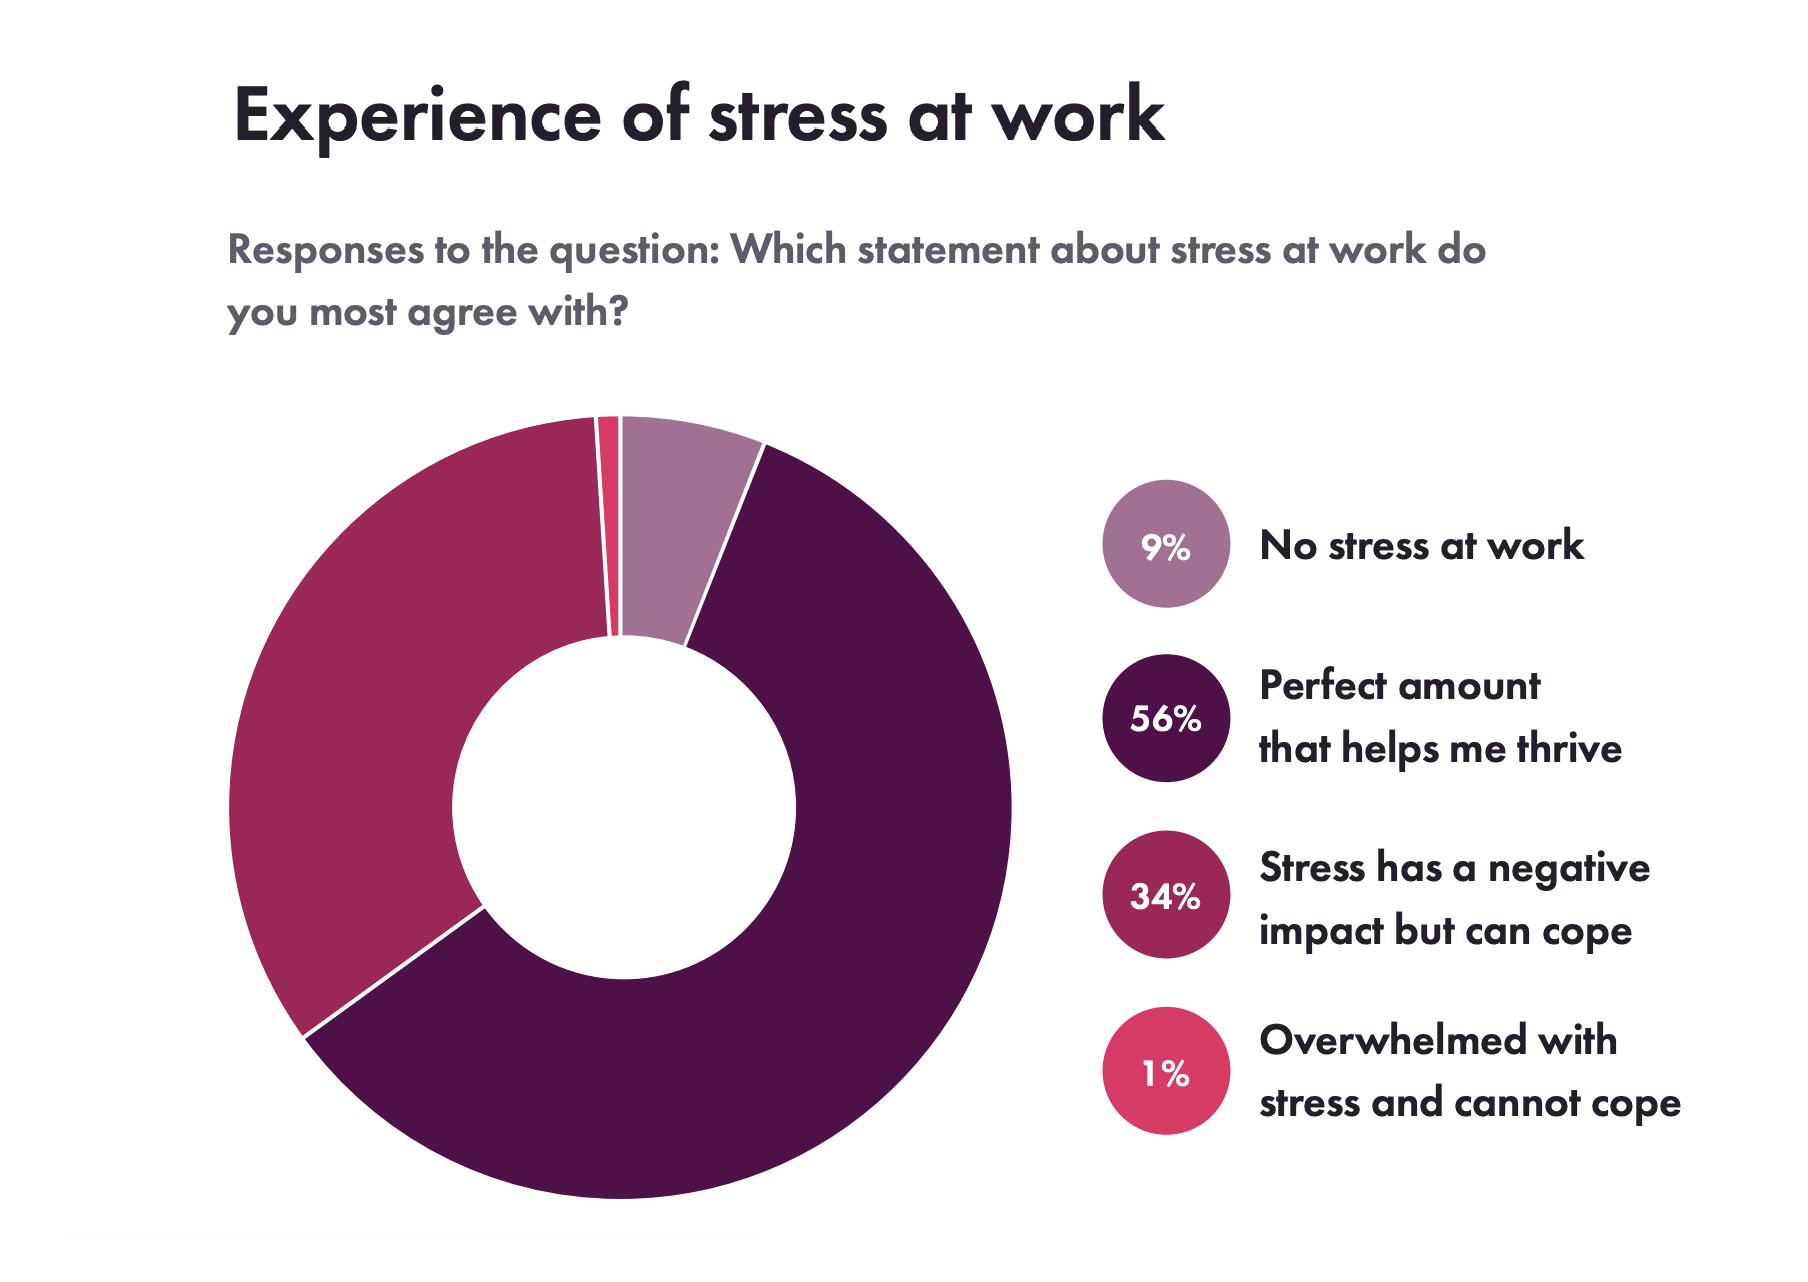 Stress statistics showing perception of steress at work